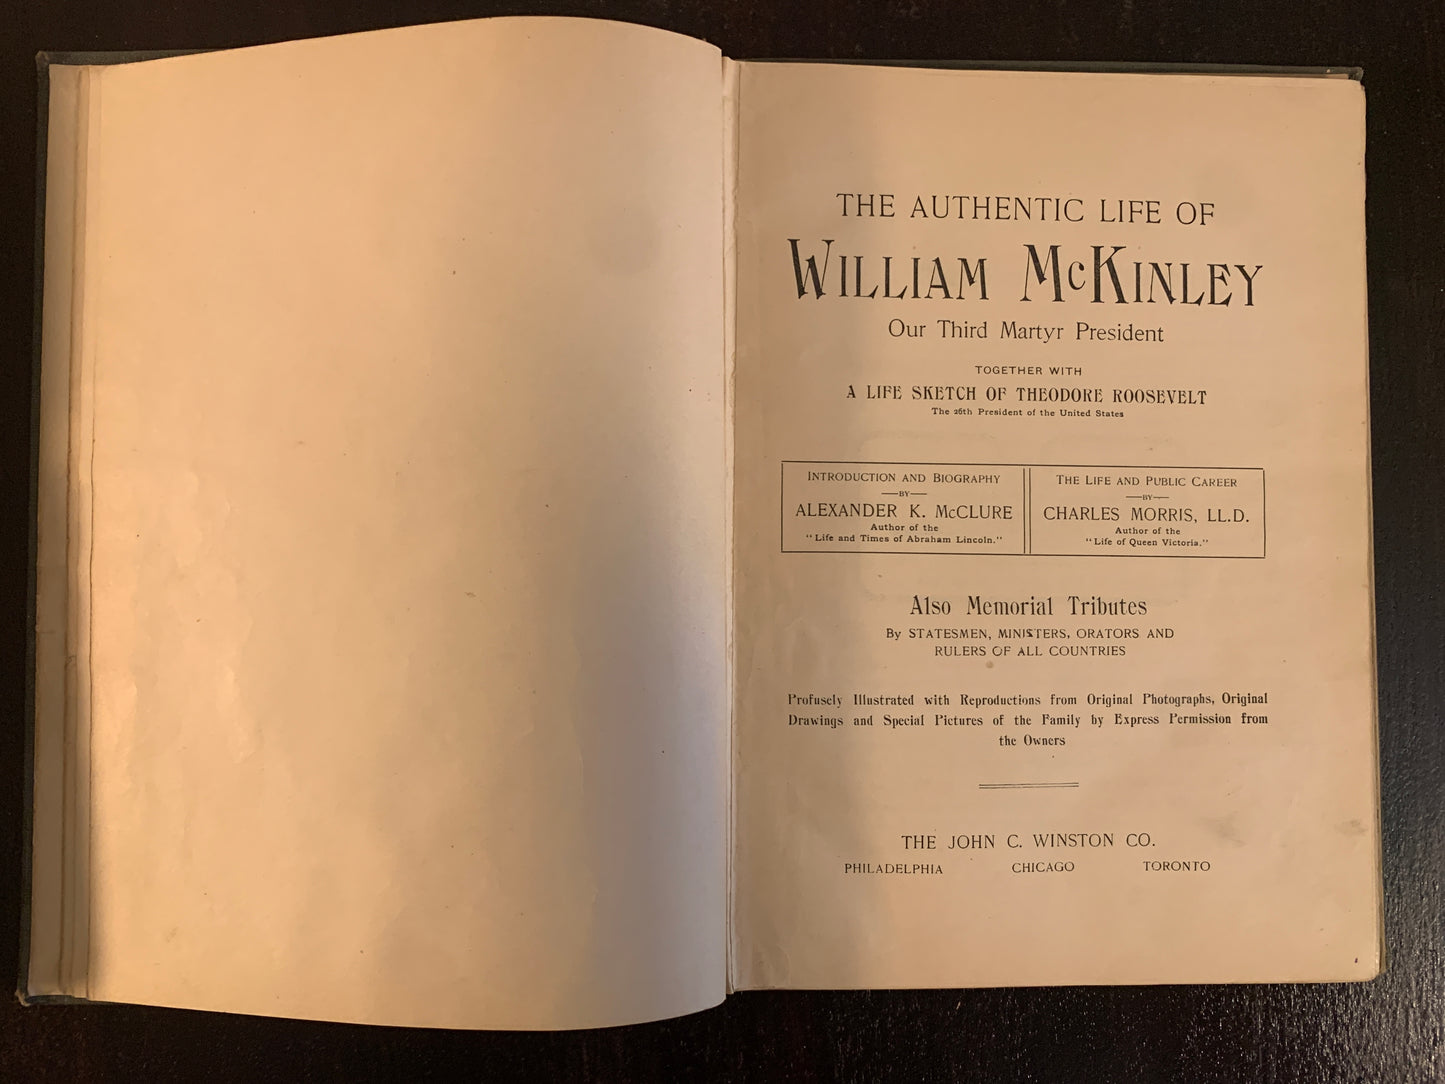 The Authentic Life of William McKinley: Our Third Martyr President with companion book